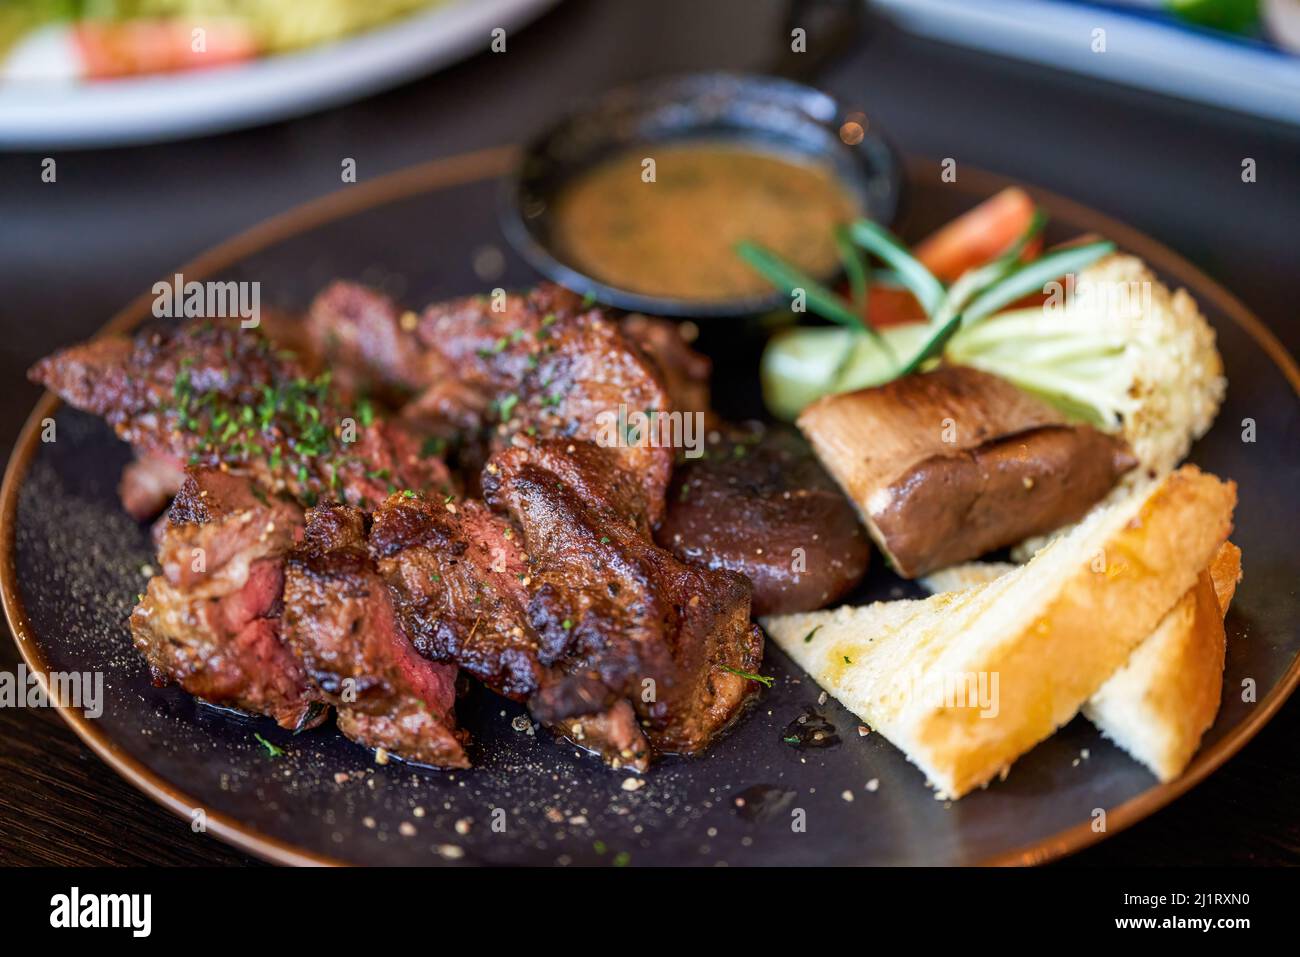 A delicious and tempting western steak, smoked grilled sirloin steak Stock Photo